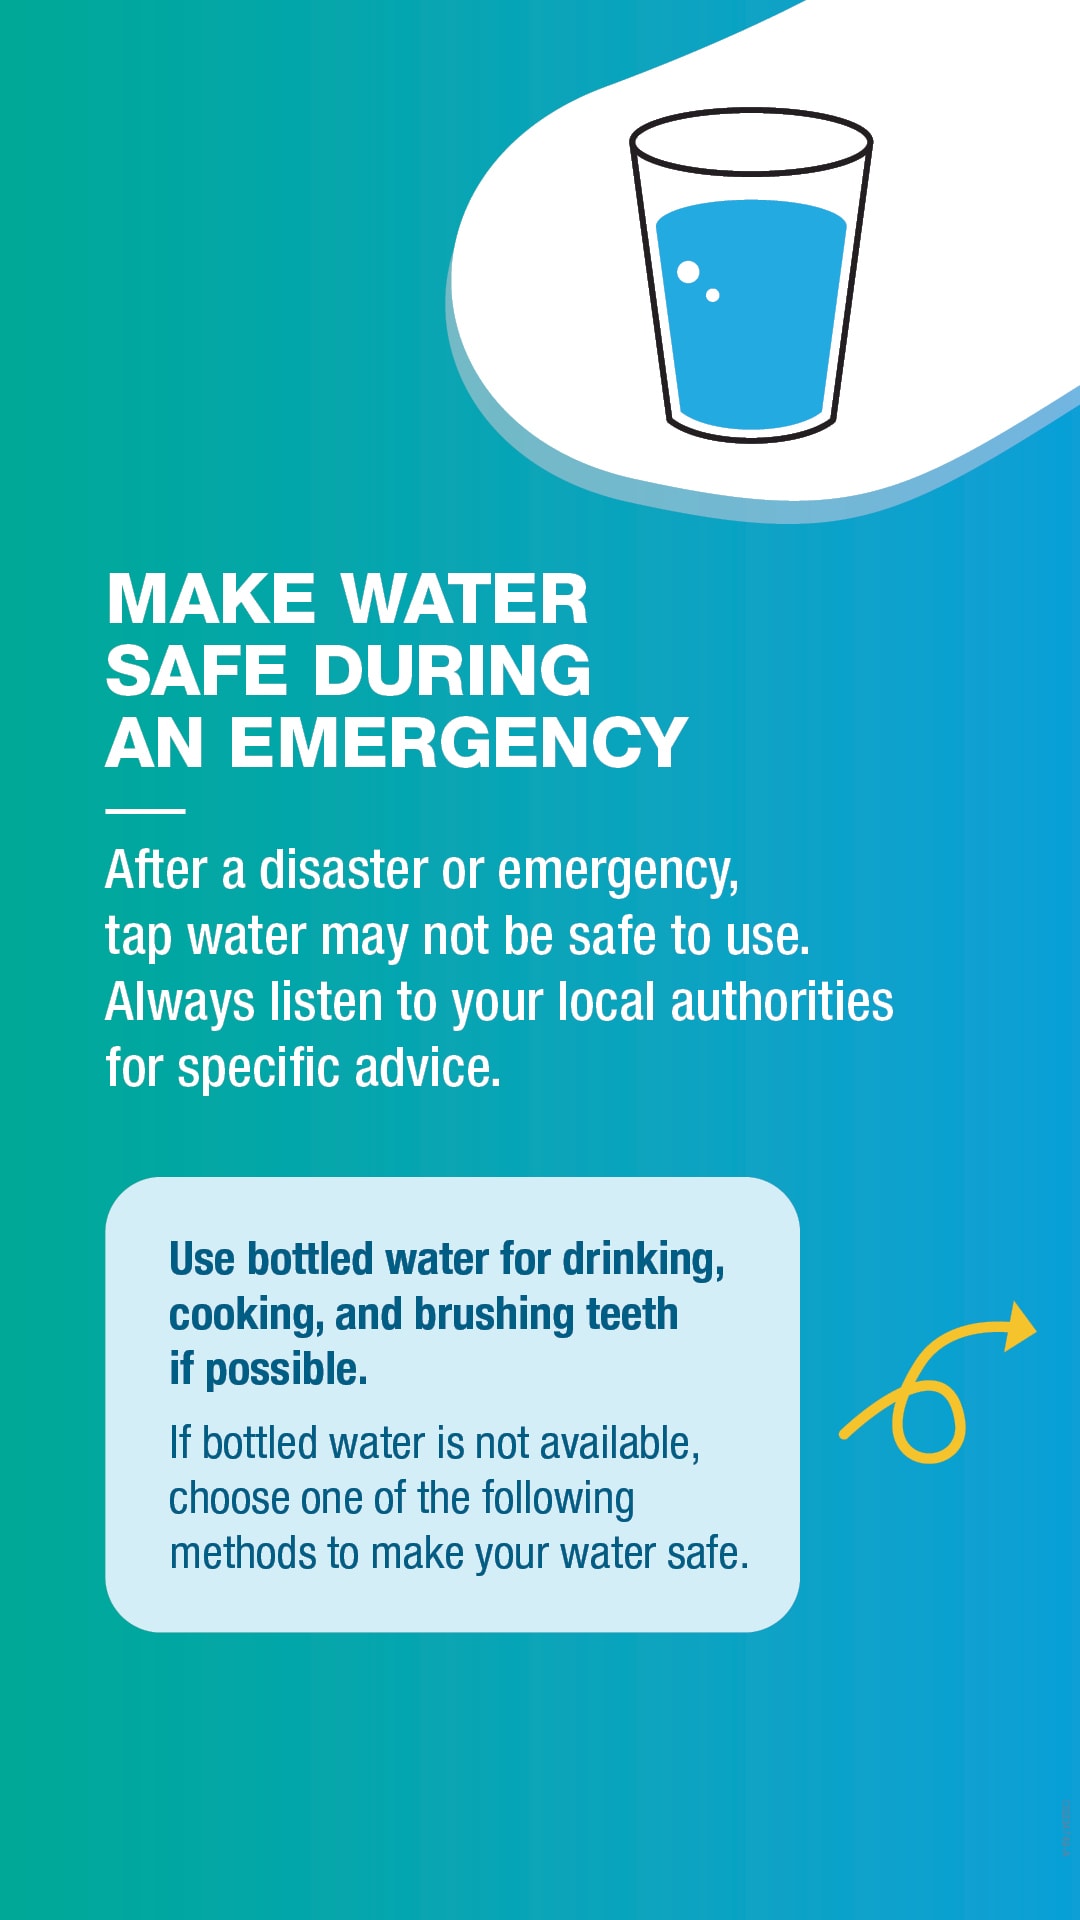 Make Water Safe During an Emergency - for Facebook